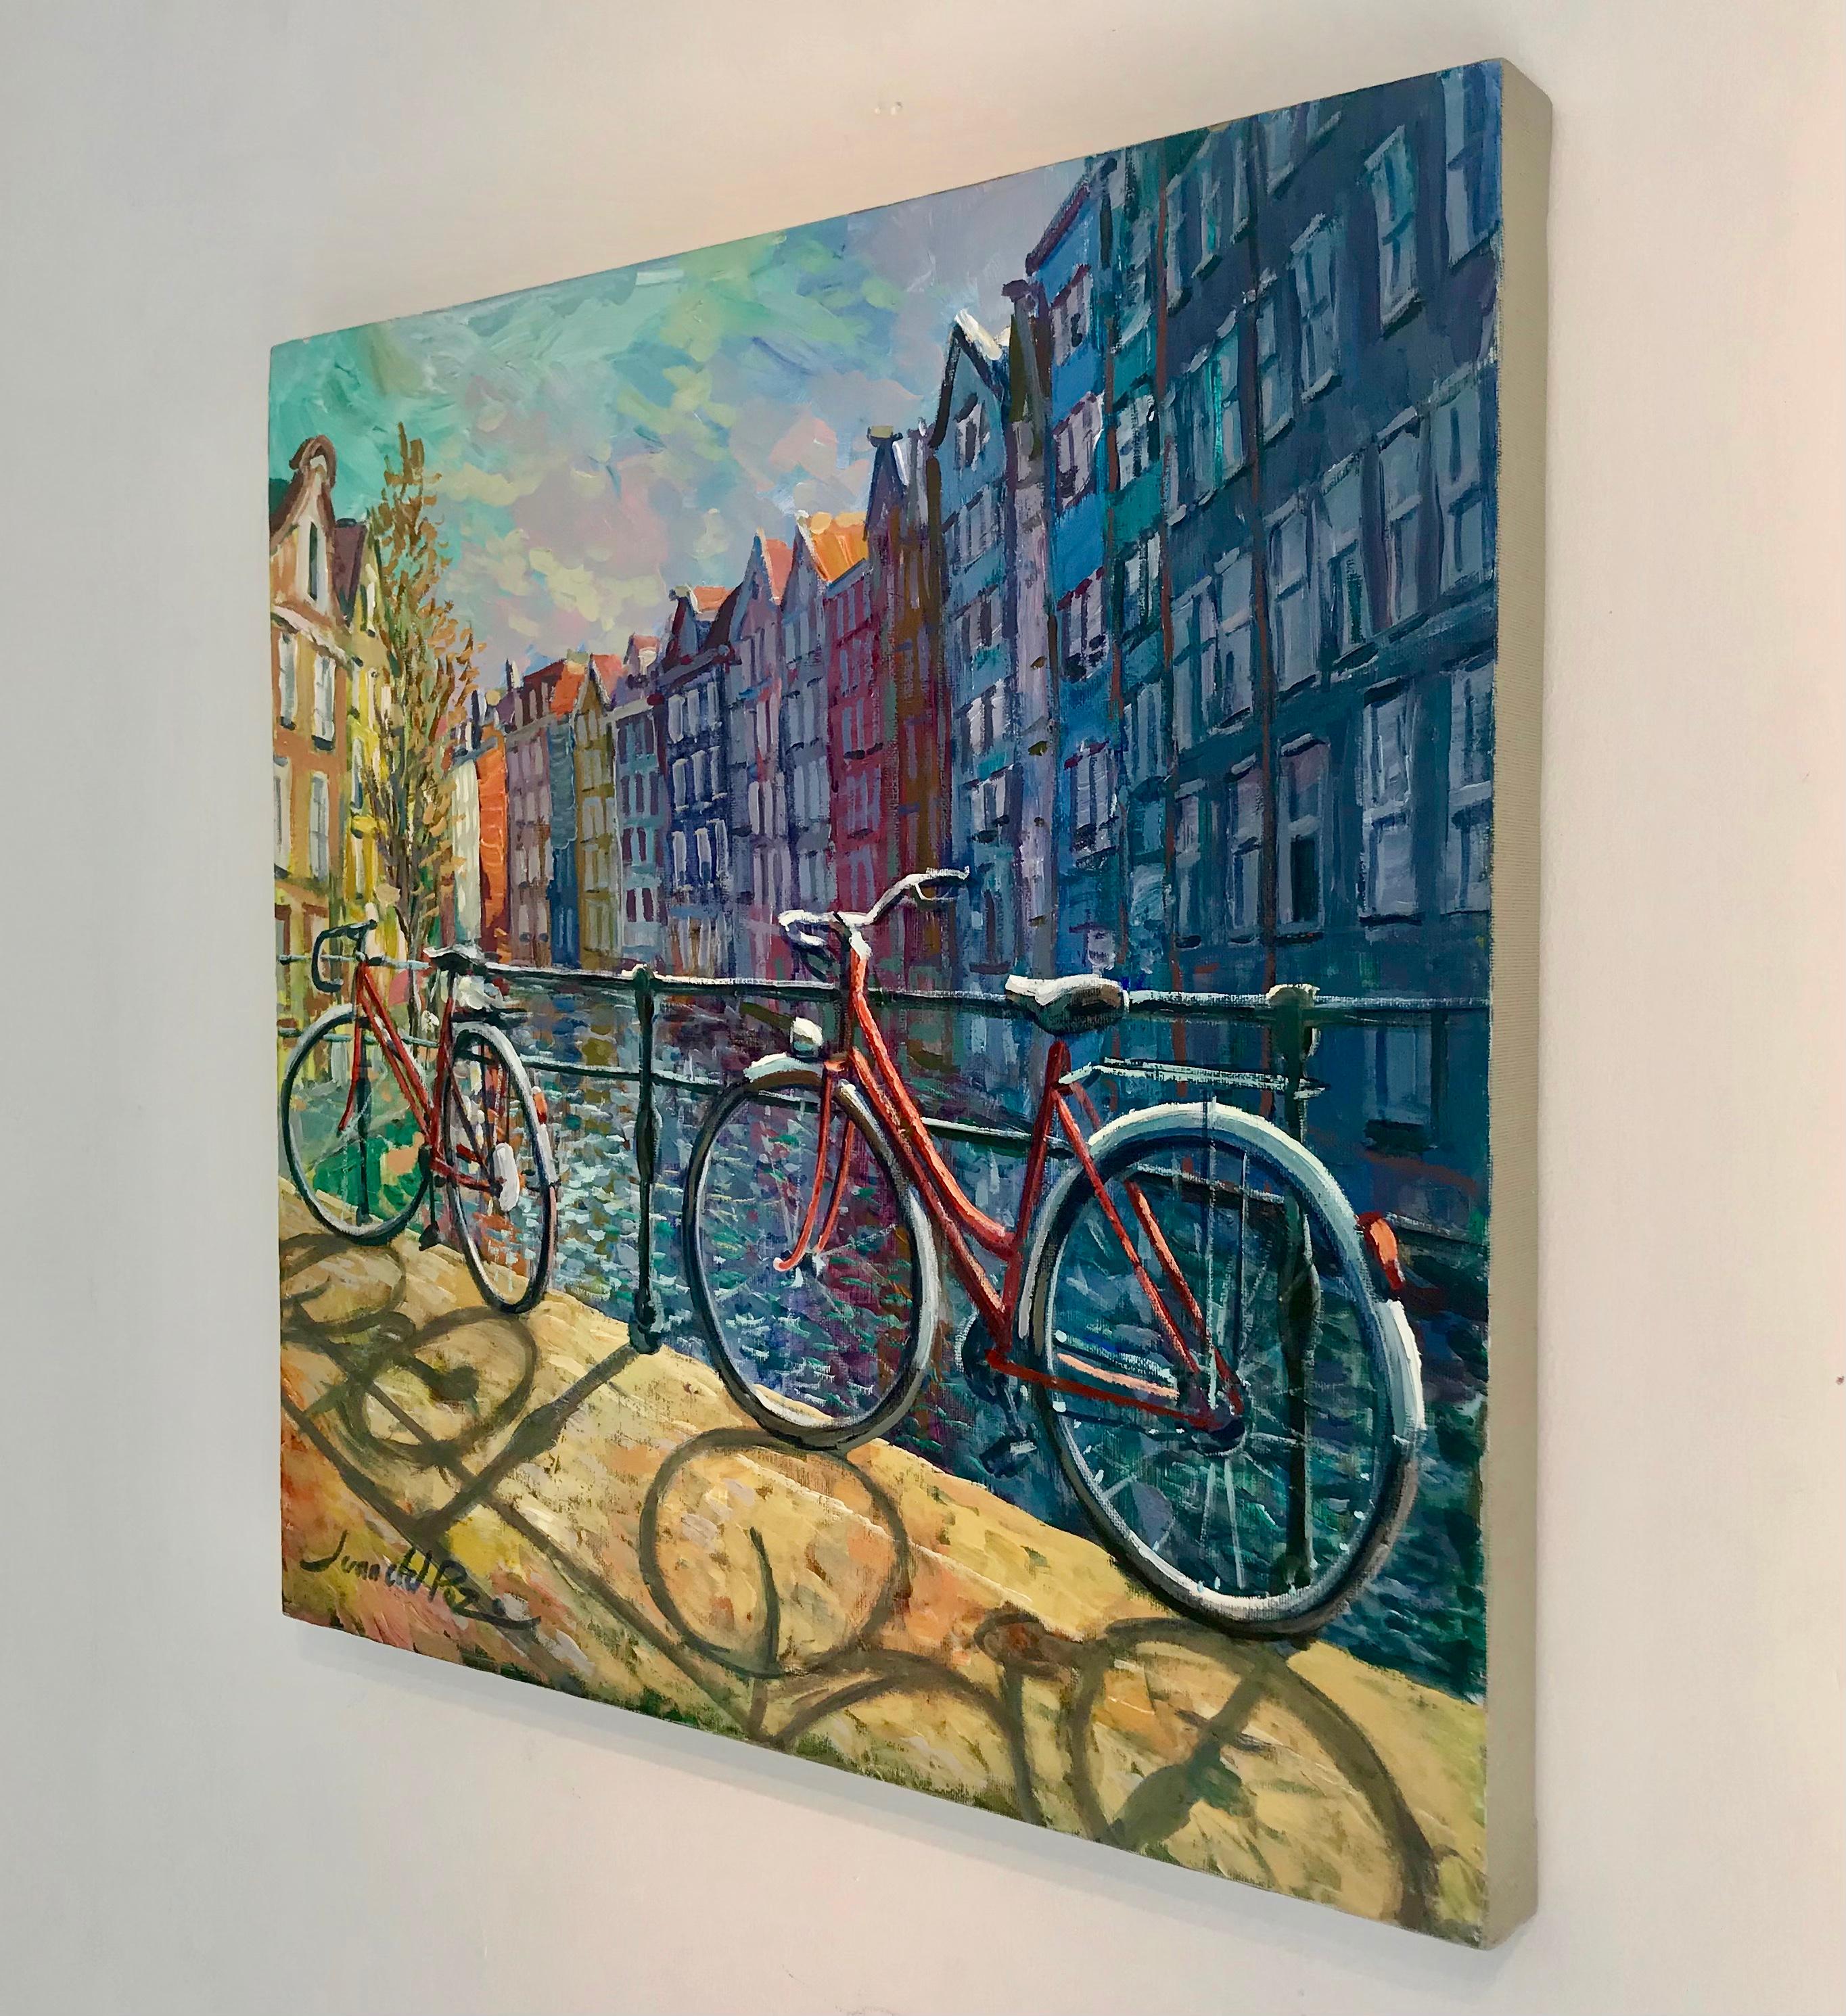 Amsterdam Bikes 2-original impressionism cityscape oil painting-contemporary Art - Impressionist Painting by Juan del Pozo